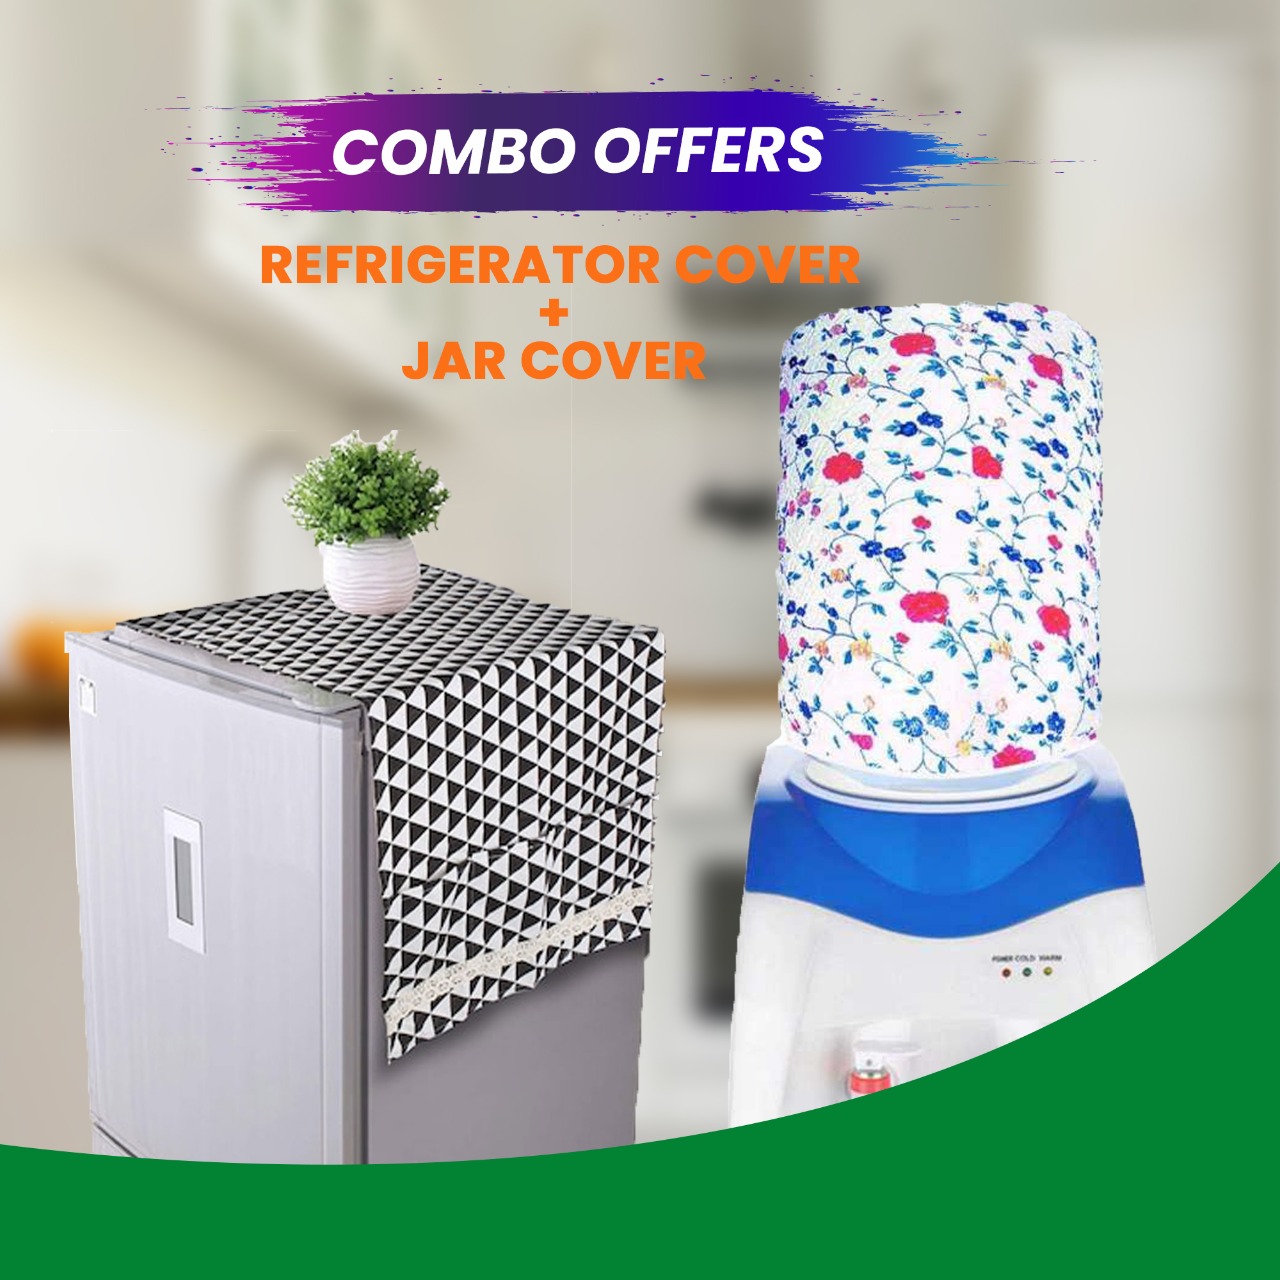 Refrigerator + Jar cover(Combo Offers) 